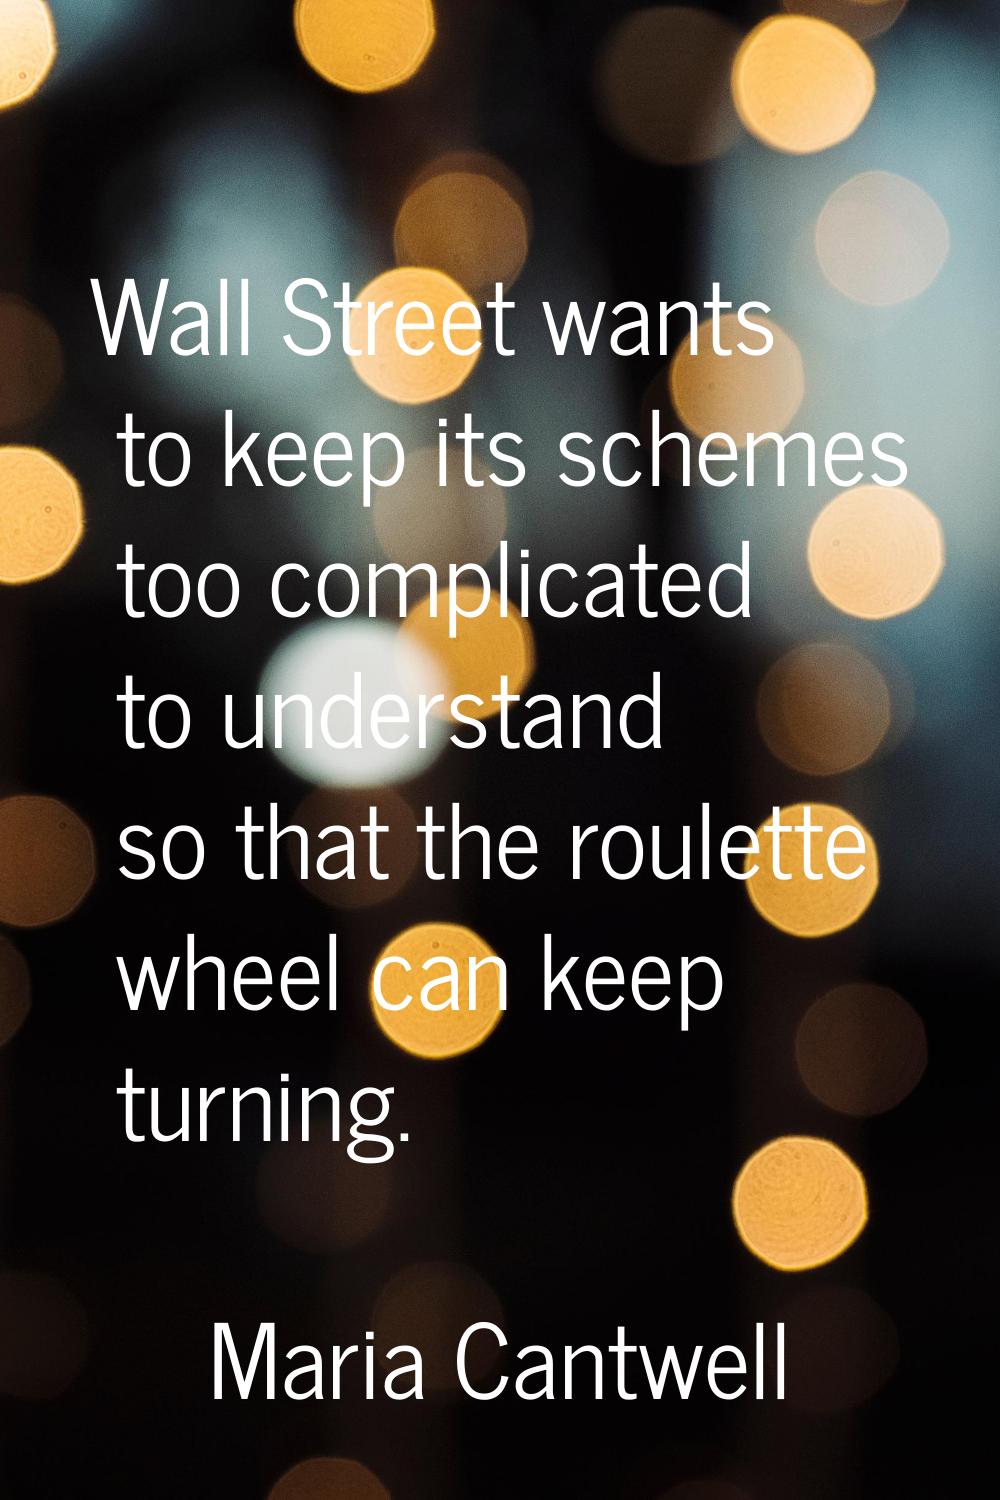 Wall Street wants to keep its schemes too complicated to understand so that the roulette wheel can 